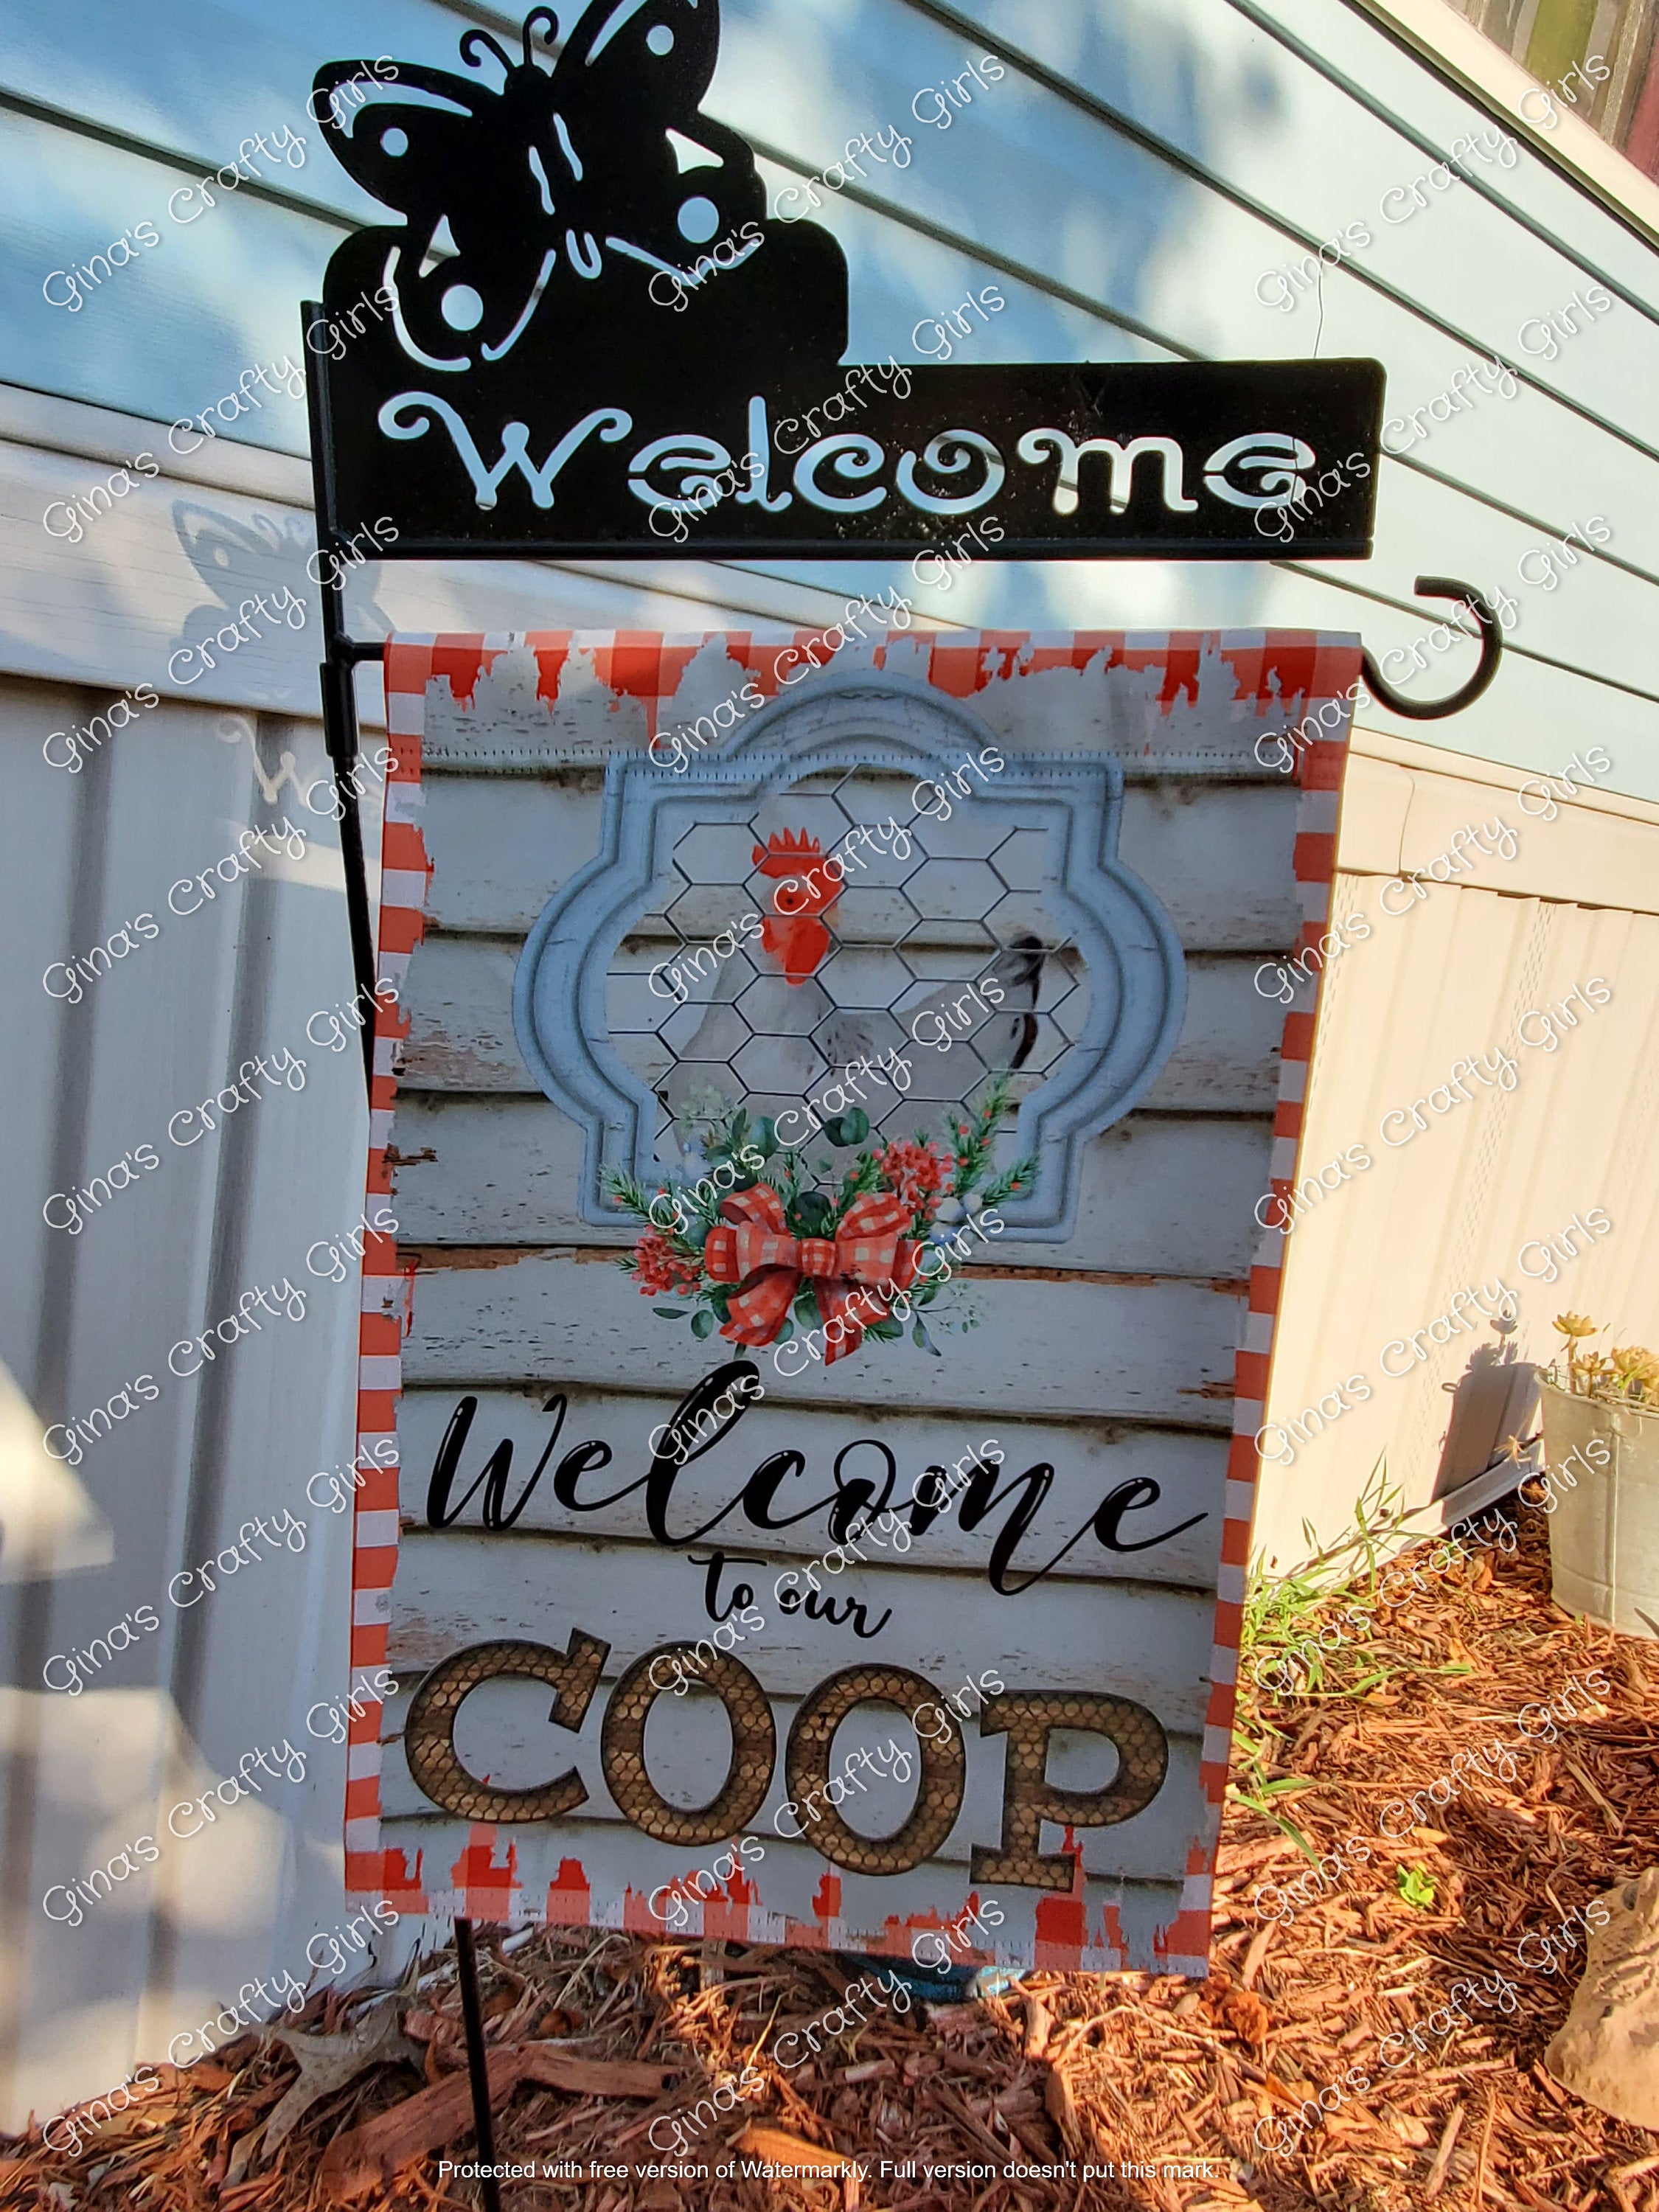 Welcome to Our Coop Chickens 12 x18 Double Sided Garden Flag